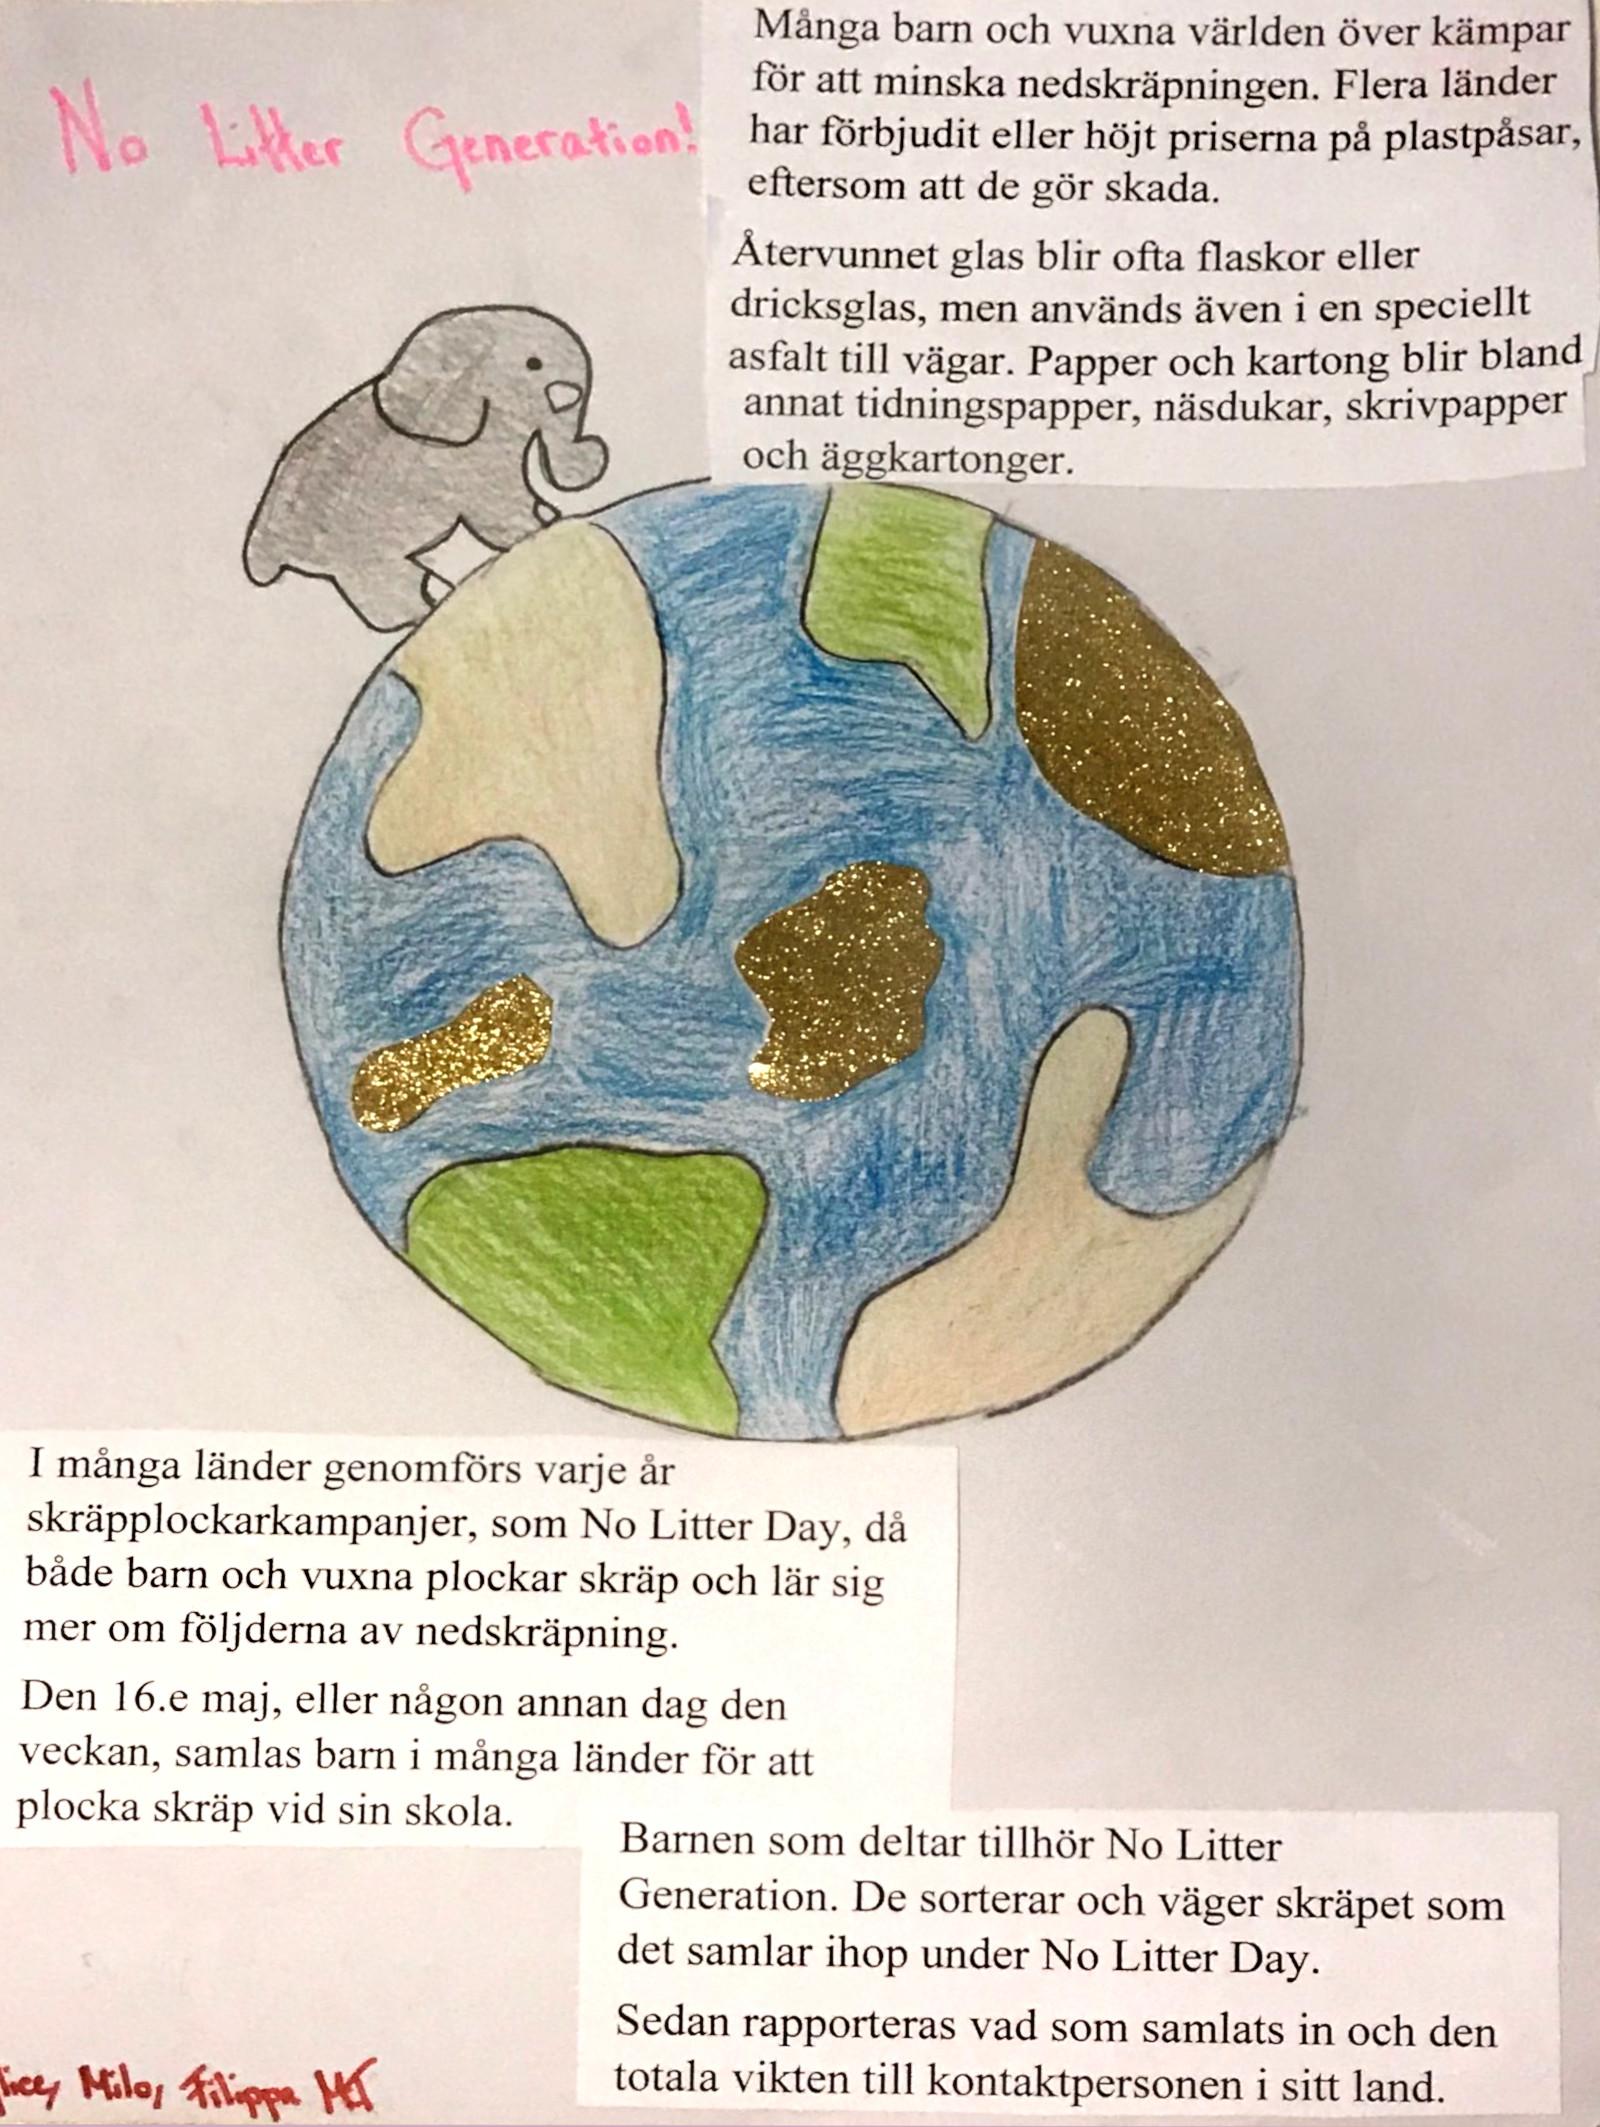 Drawing of the earth